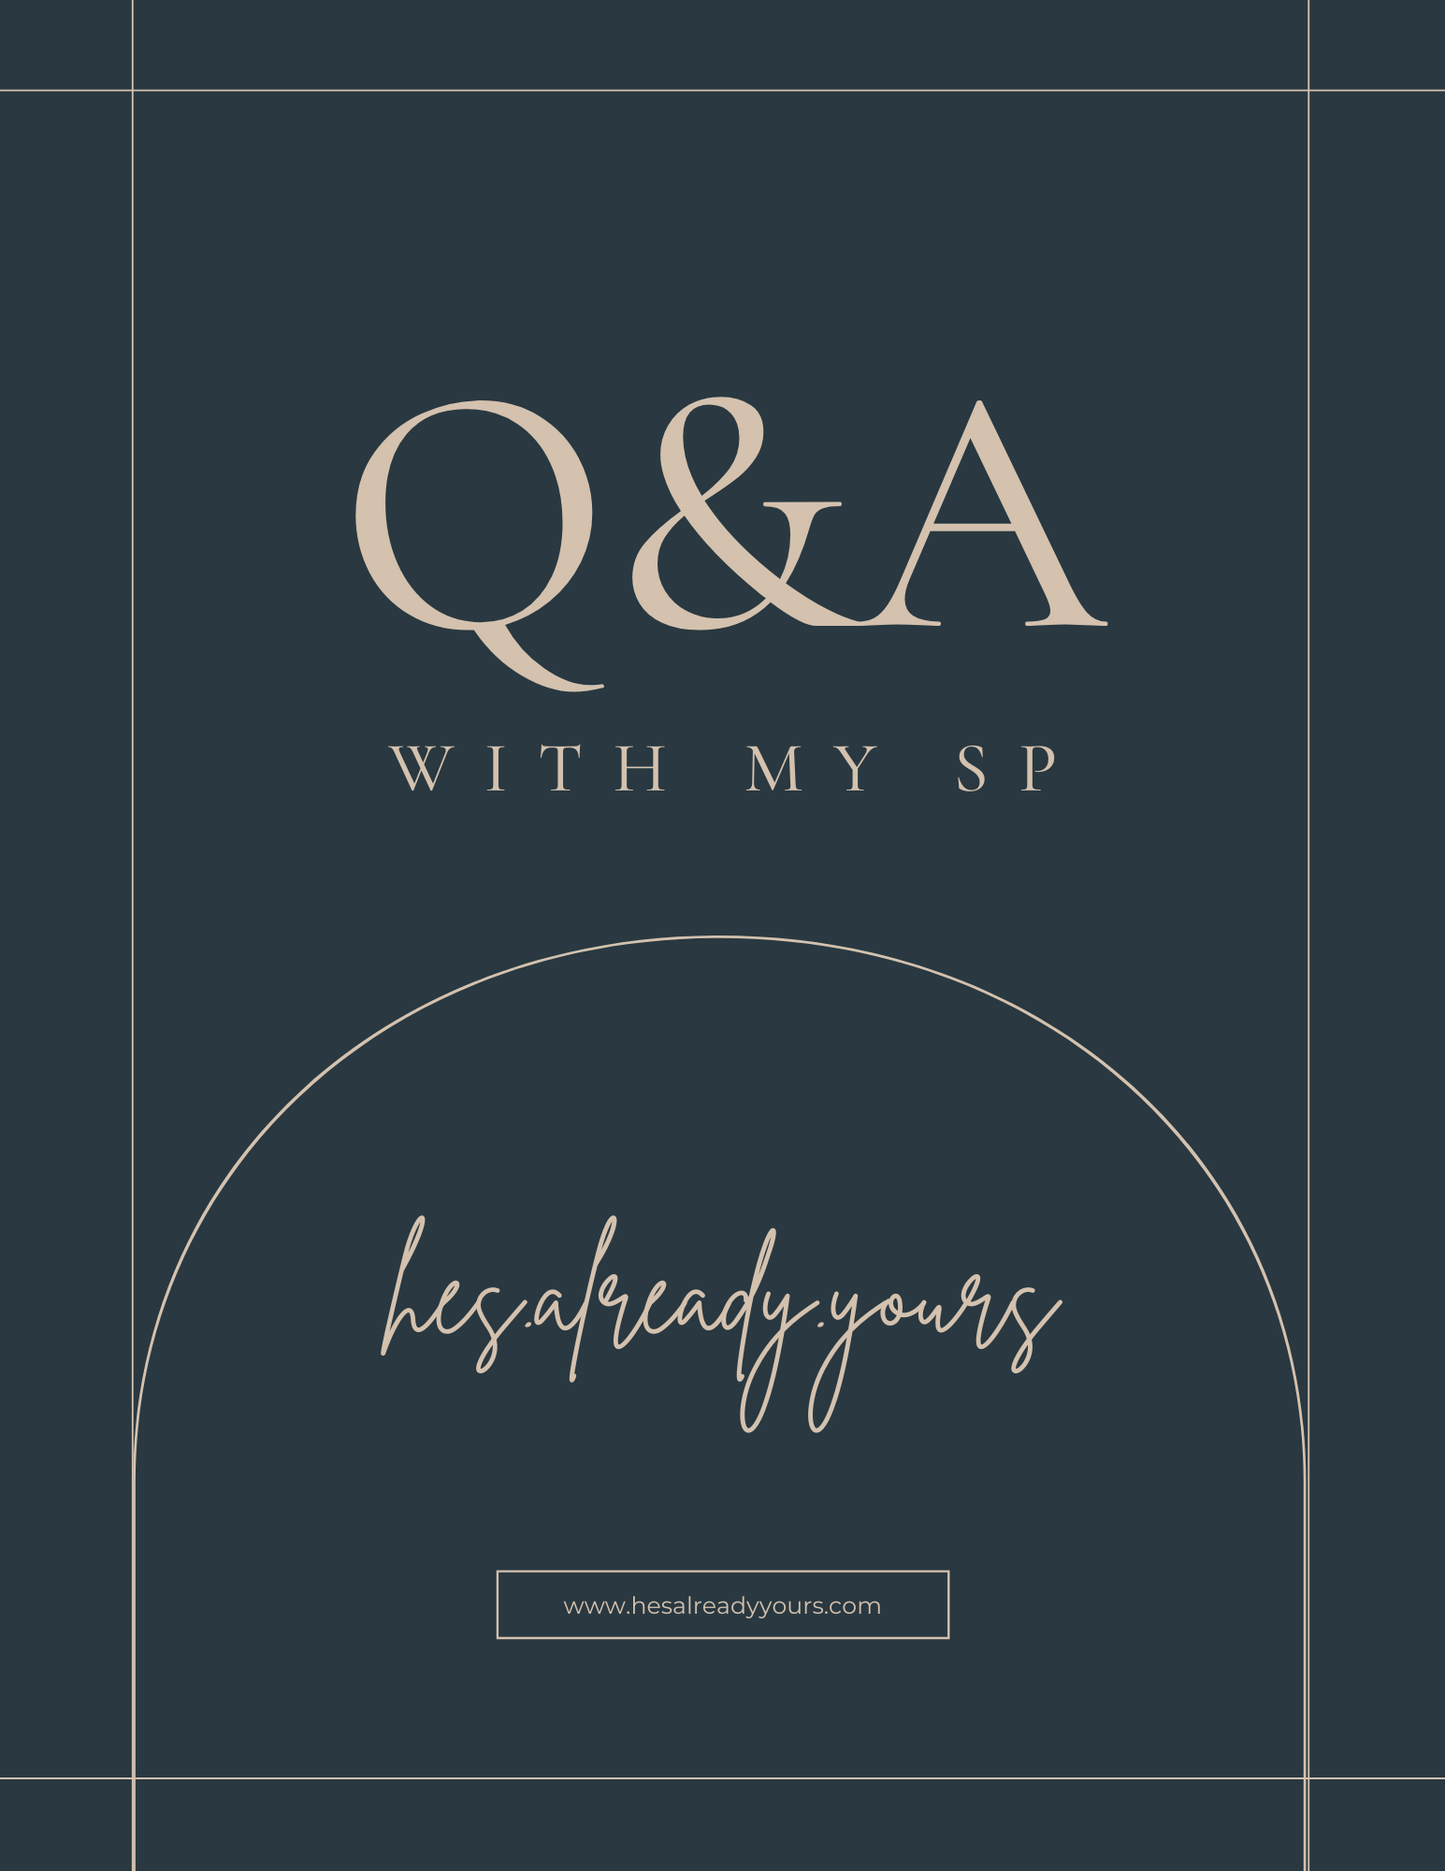 4. Q&A With My SP